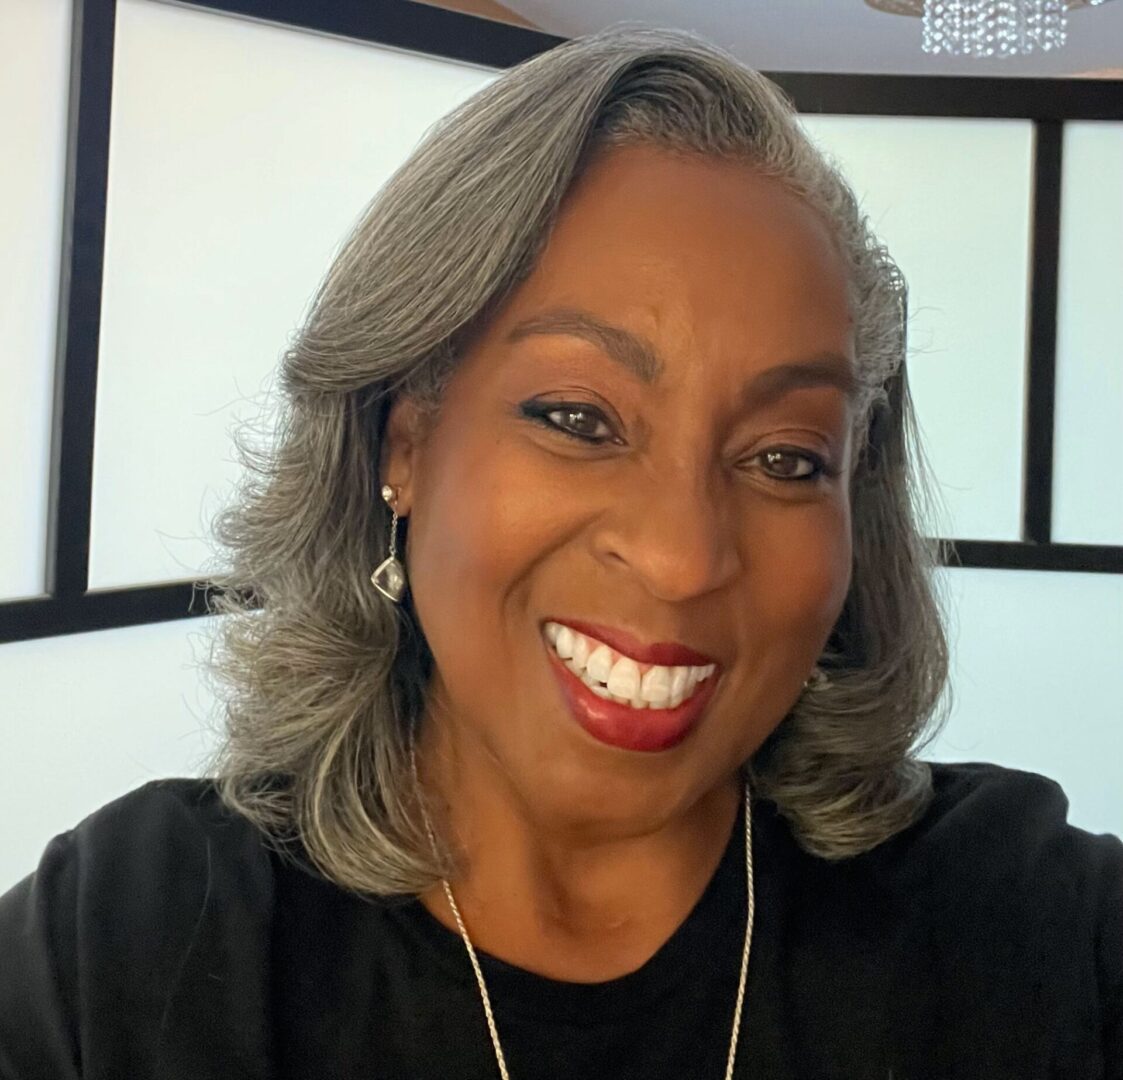 A woman with gray hair smiles for the camera.